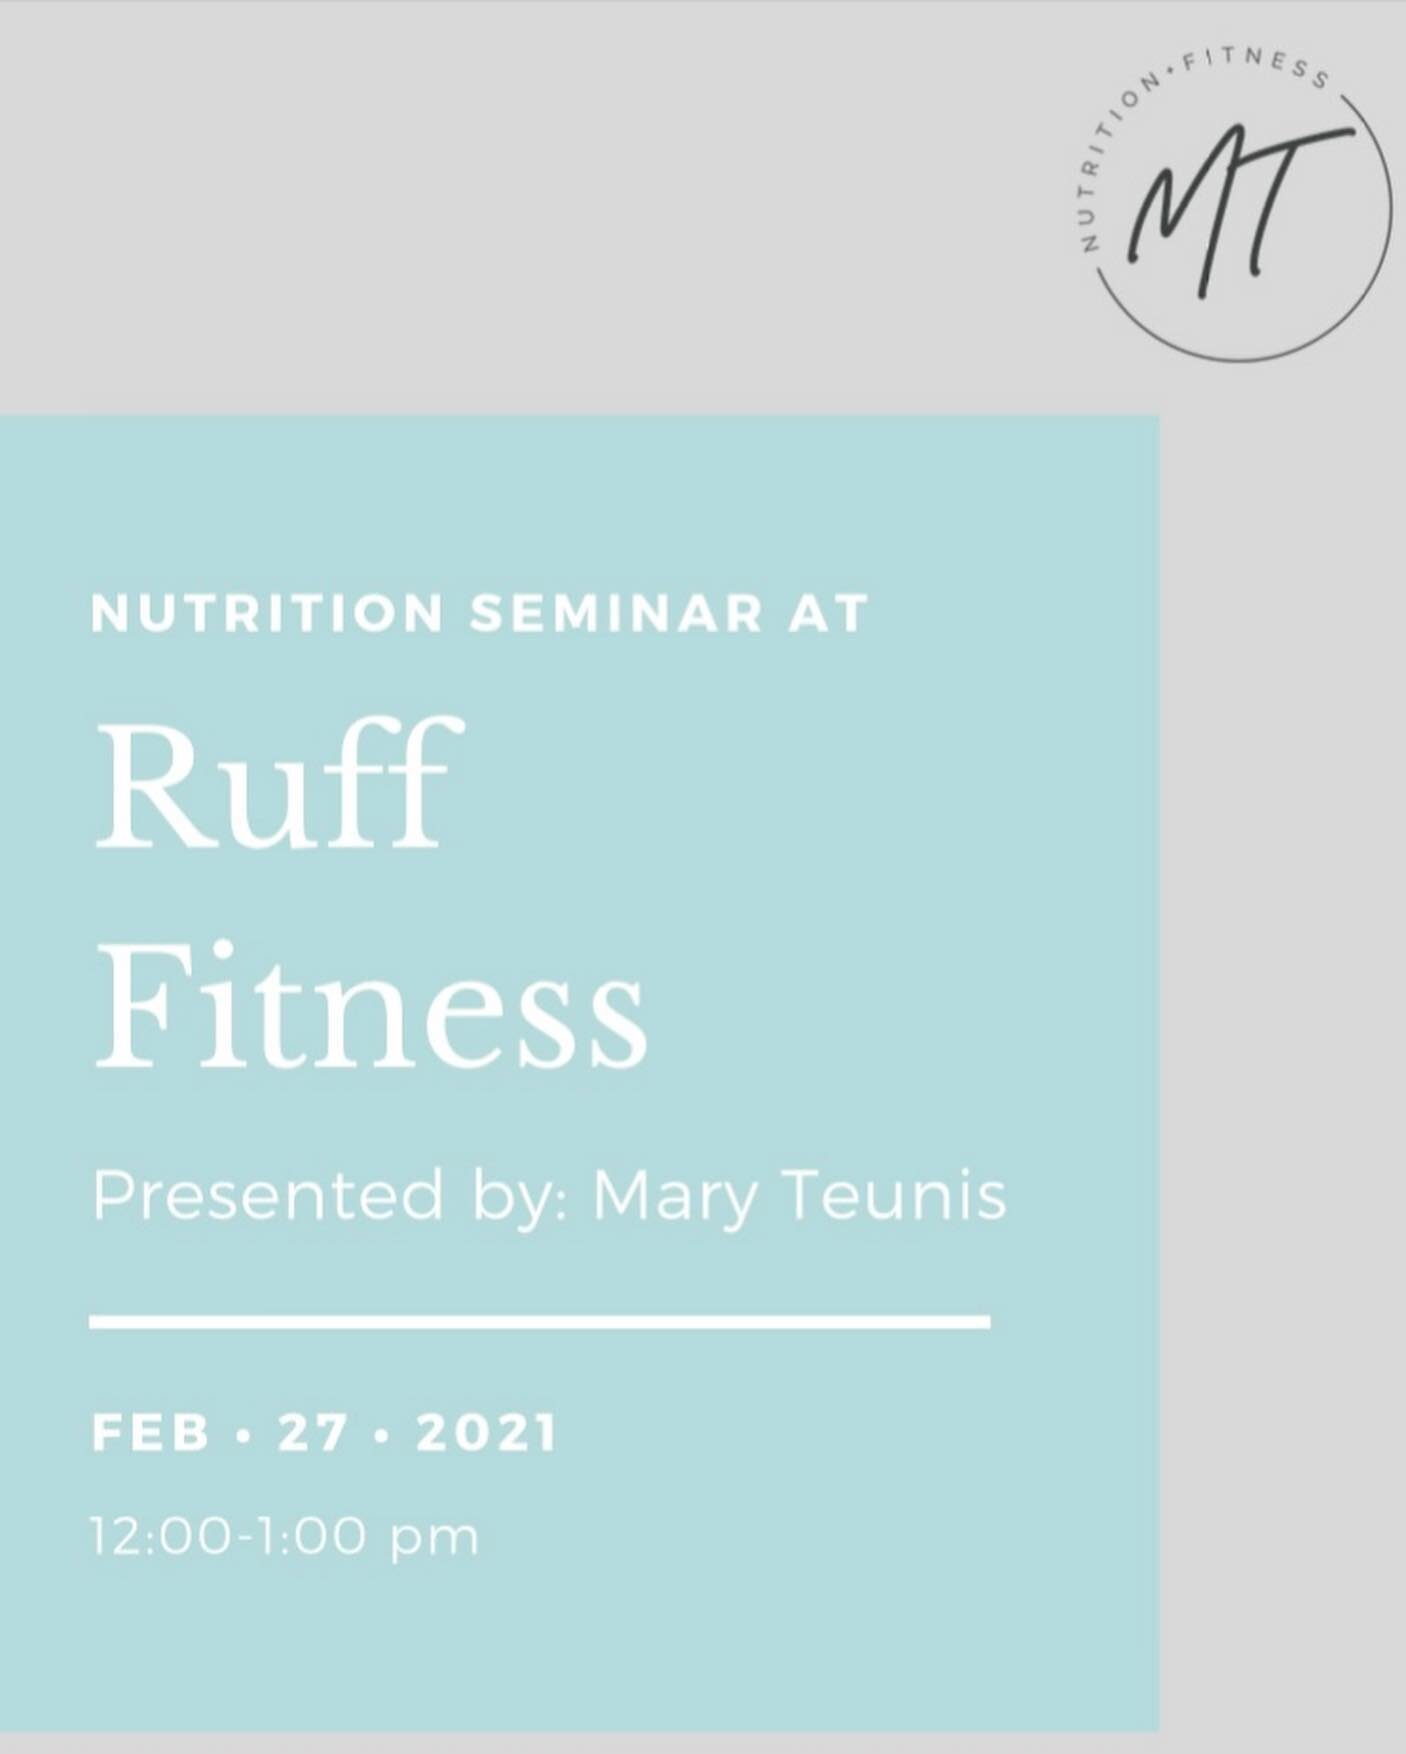 Are you looking to learn more about nutrition!? Ruff fitness trainer and nutrition coach, Mary will be holding a nutrition seminar on Feb 27th at 12:00 pm. Space is limited! Please email Mary at Maryteunisnutrition@gmail.com to register today!

@mteu